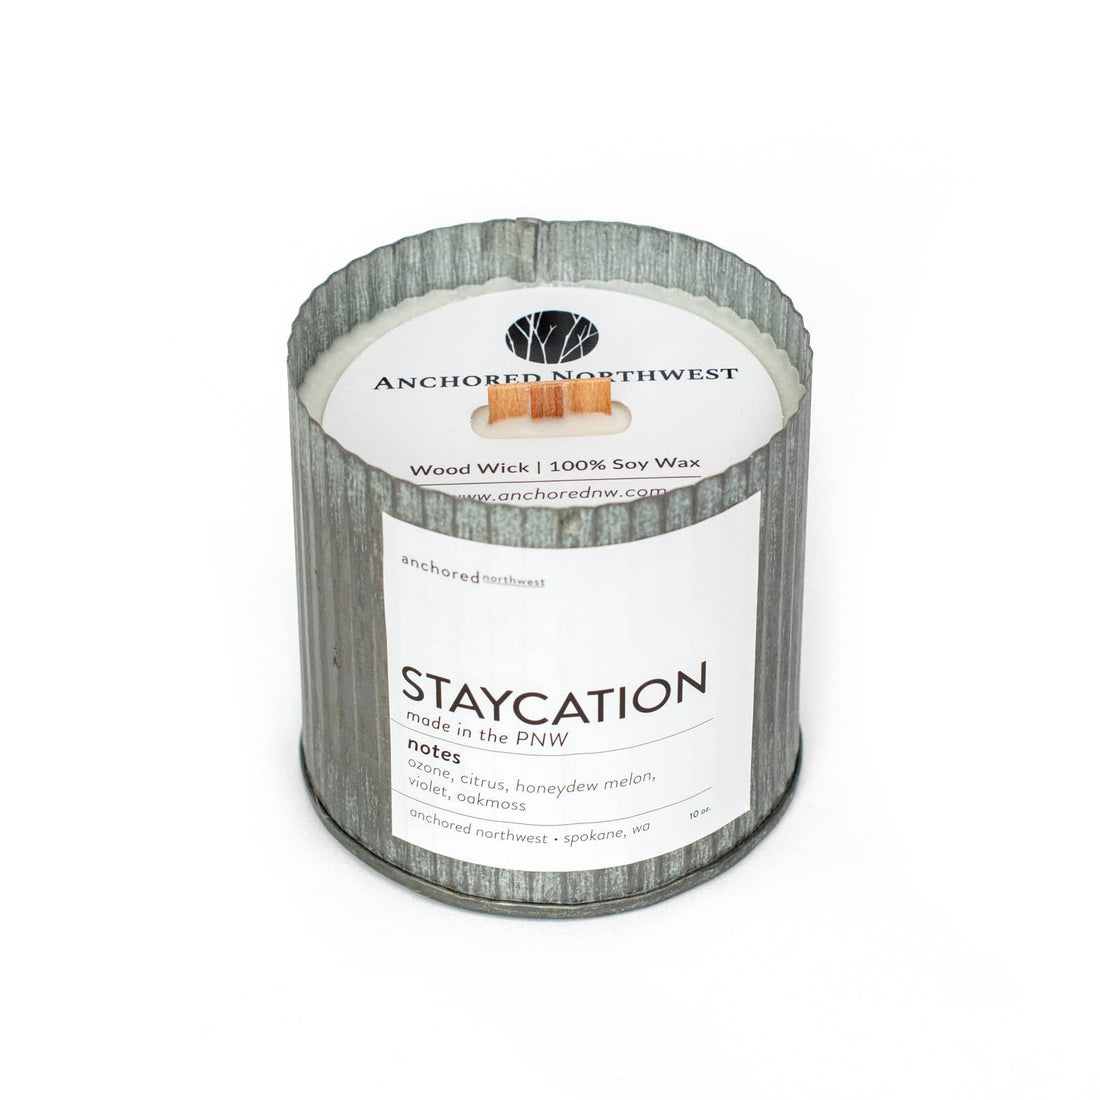 Staycation Wood Wick Rustic Farmhouse Soy Candle: 10oz